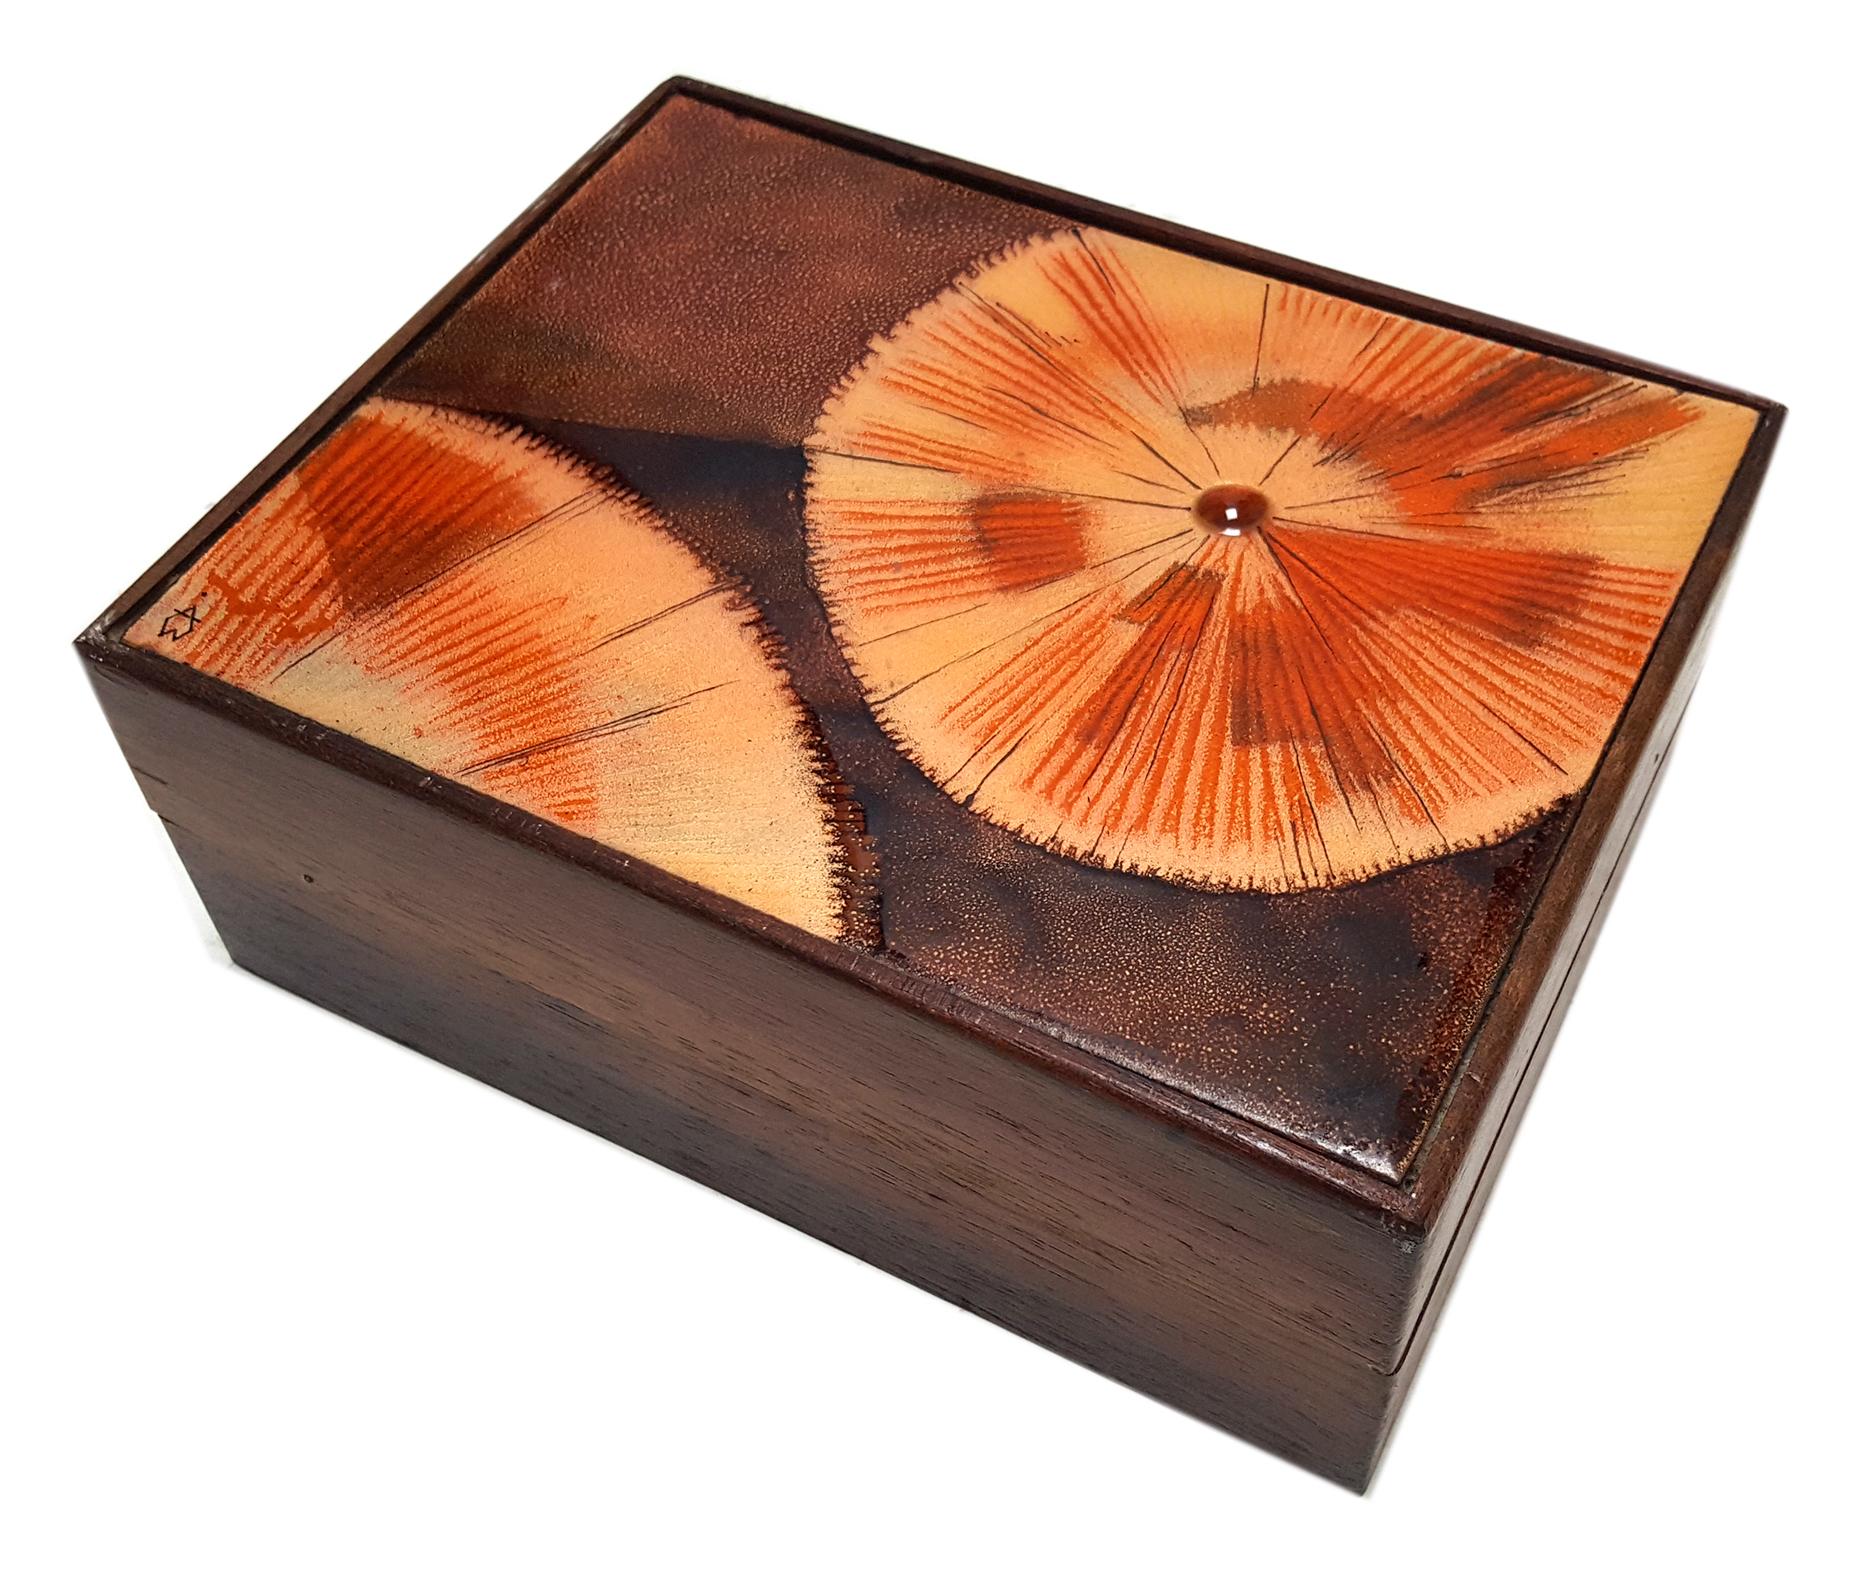 Trinket box, velvet-lined, enamel on copper plate by Irwin Whitaker.  Irwin Whitaker - Oklahoma-born artist who was prolific in California, Taos, Austin, and Michigan. We have a number of his works available.